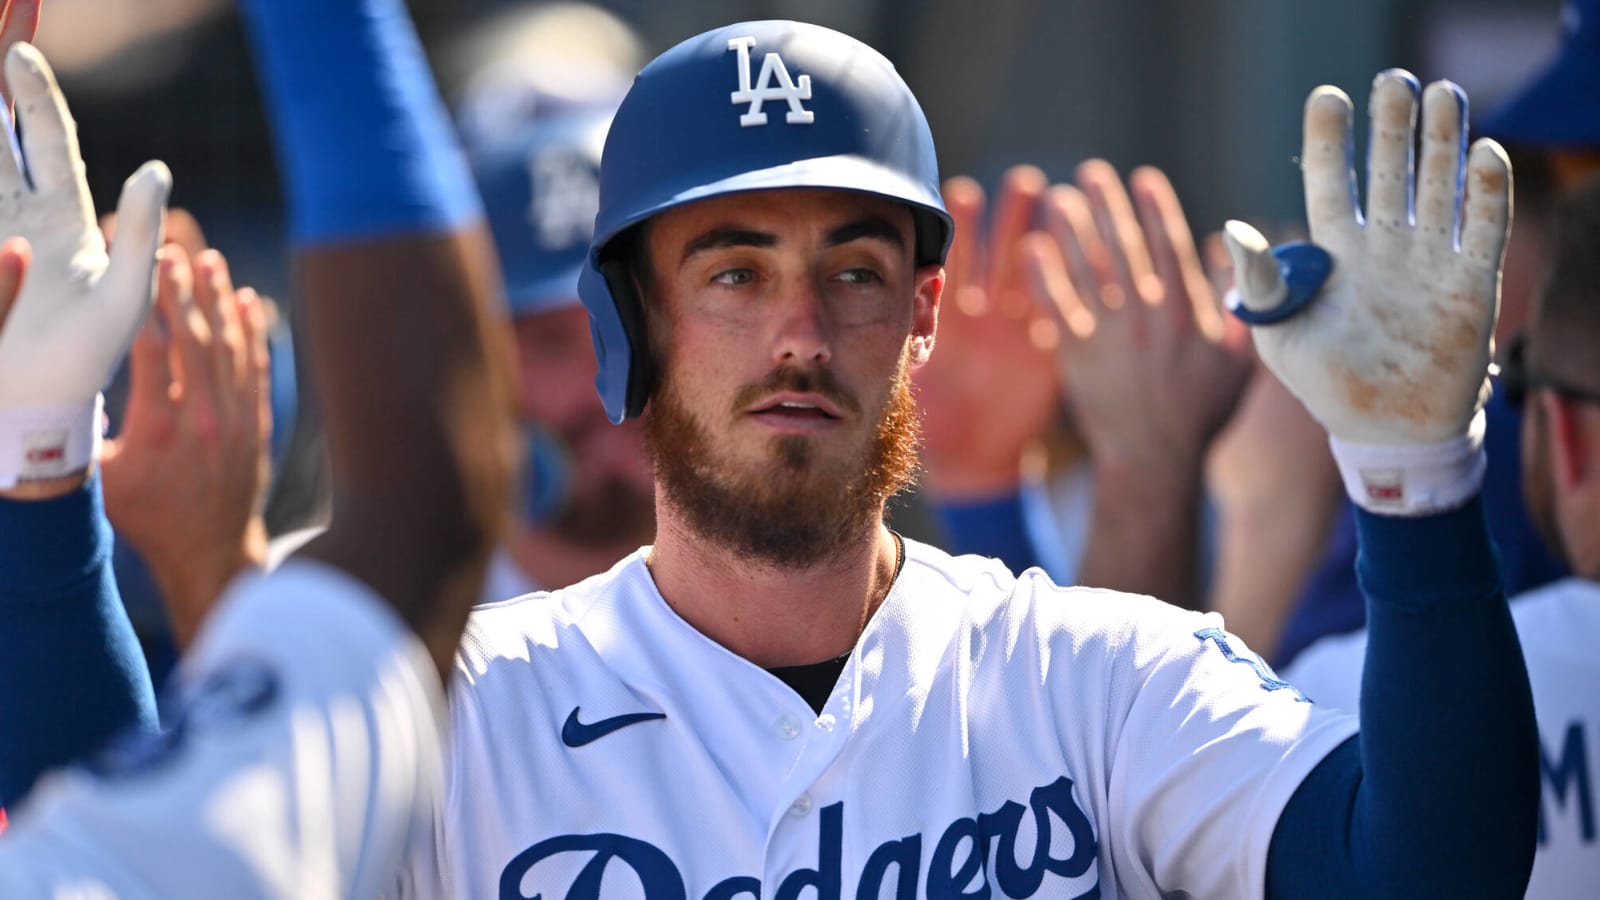 If ex-MVP Cody Bellinger remains in groove, Dodgers are even more formidable